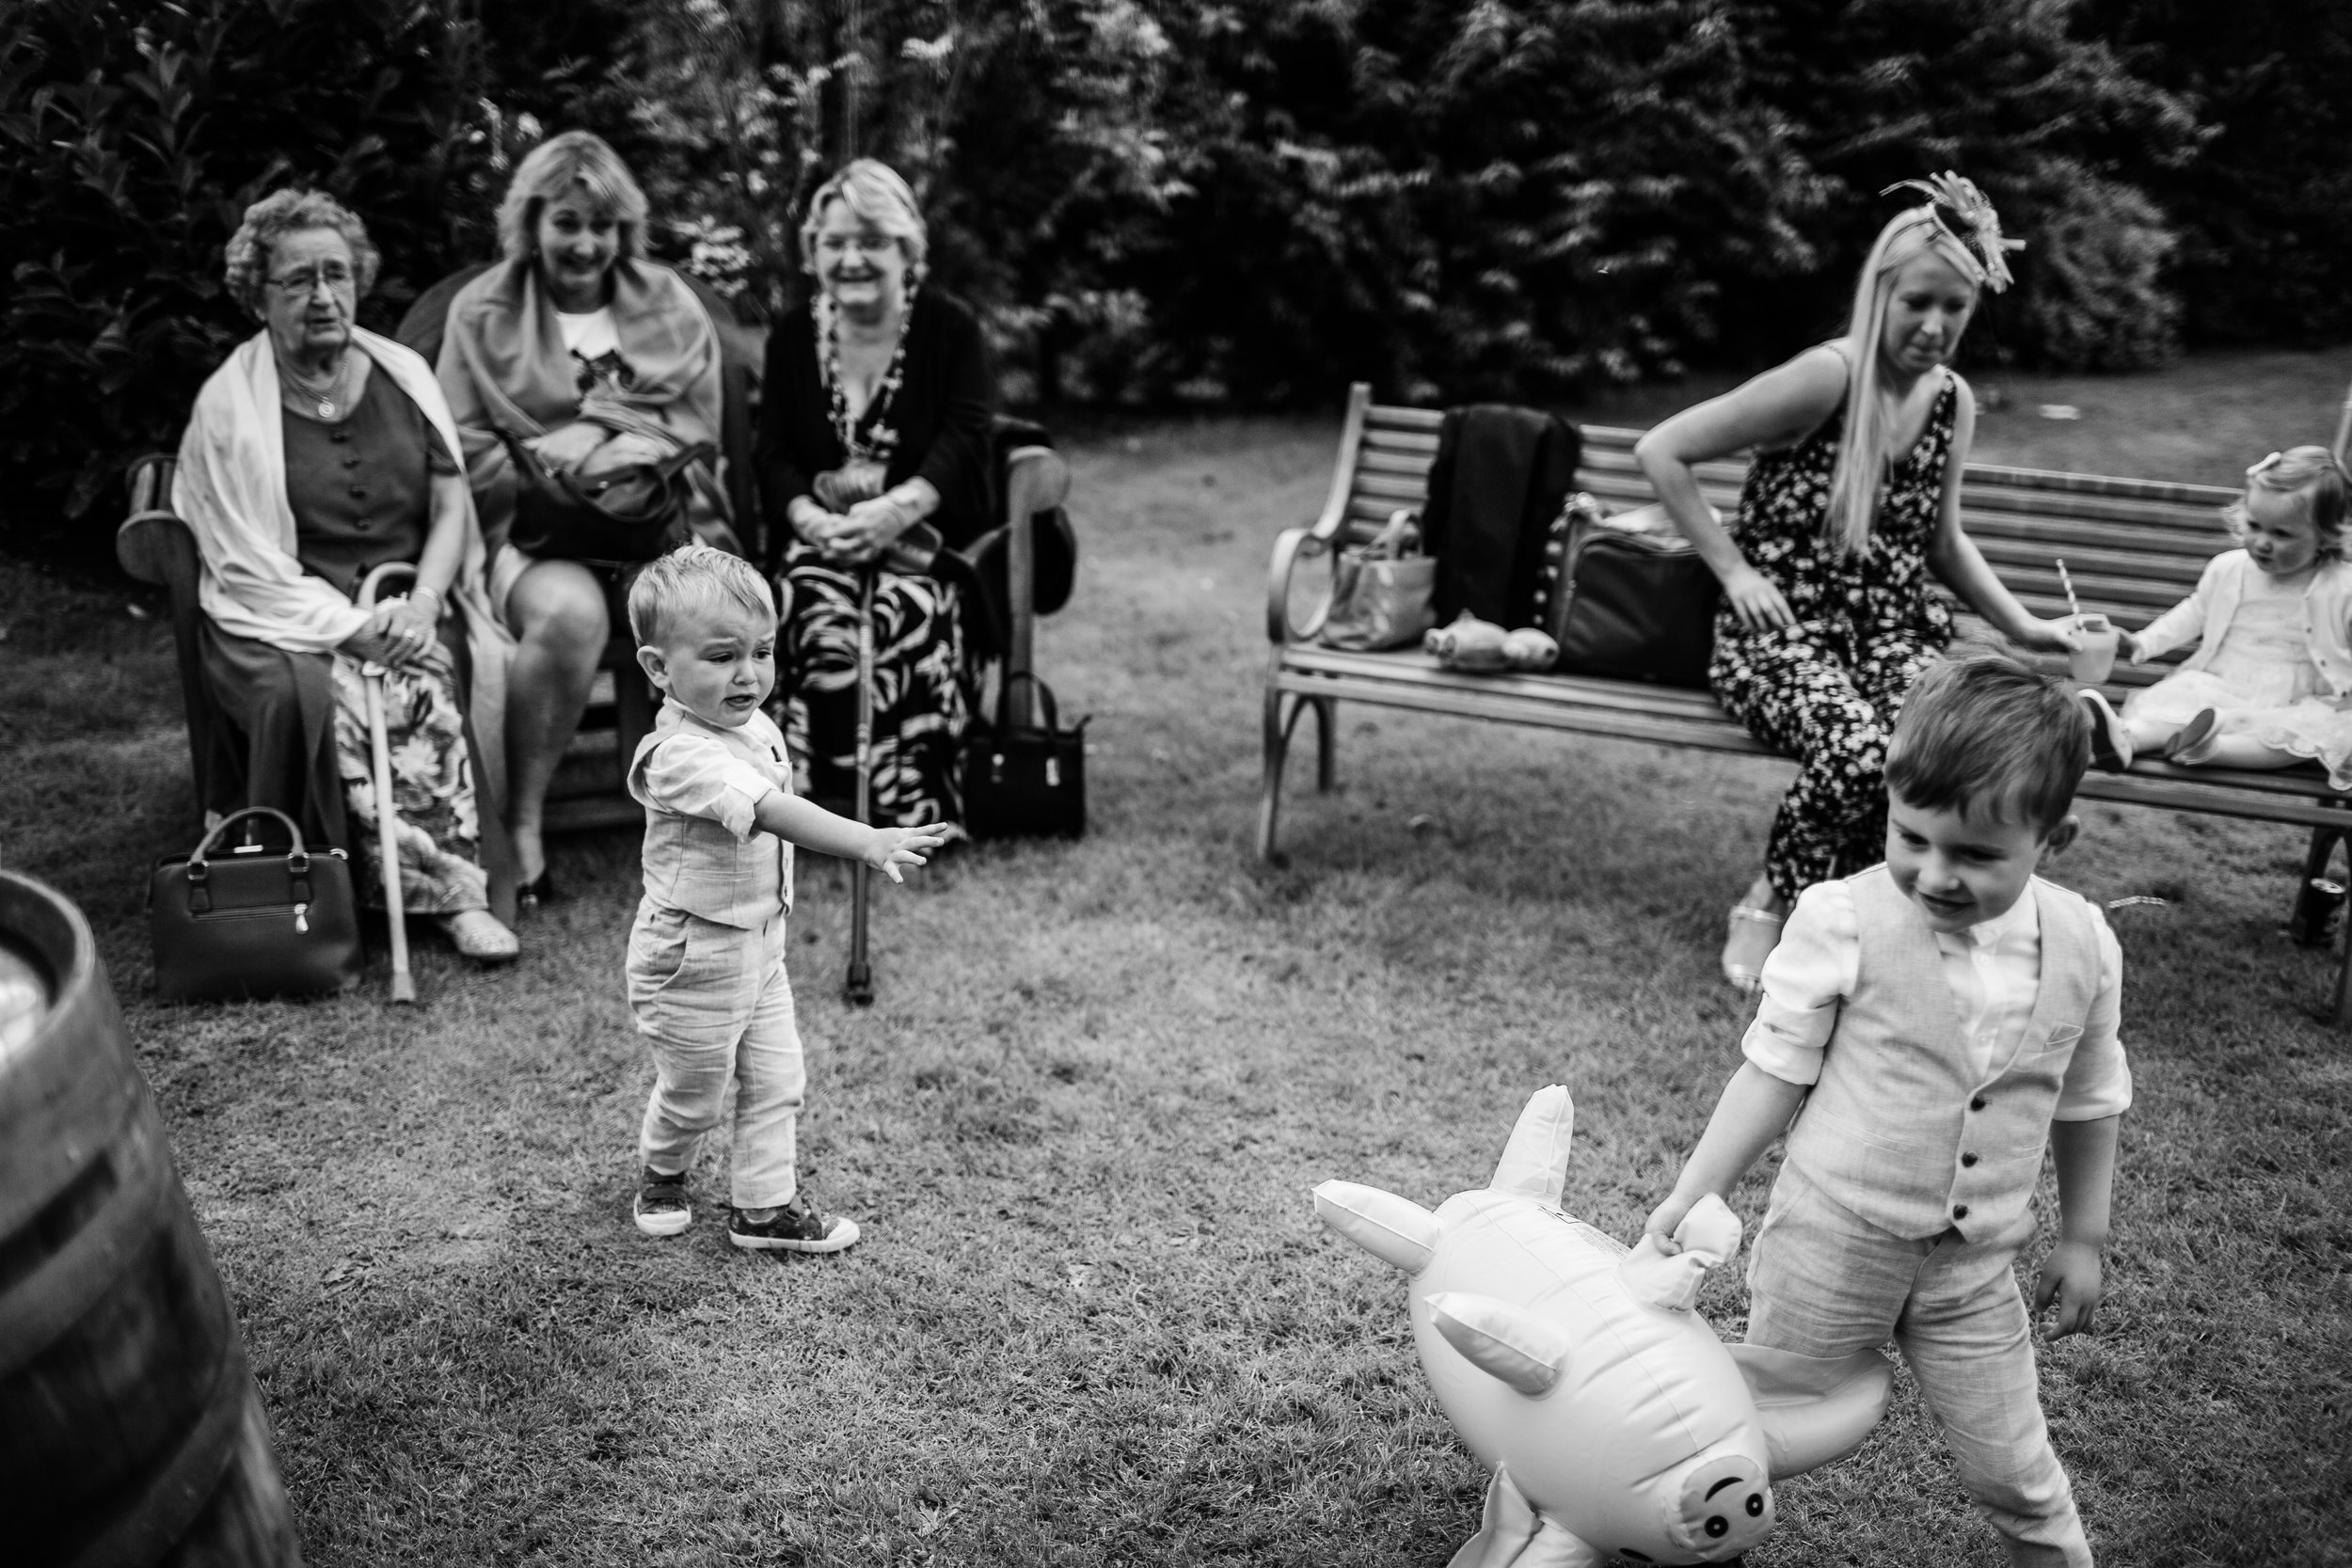 children play with inflatable pigs at a wedding